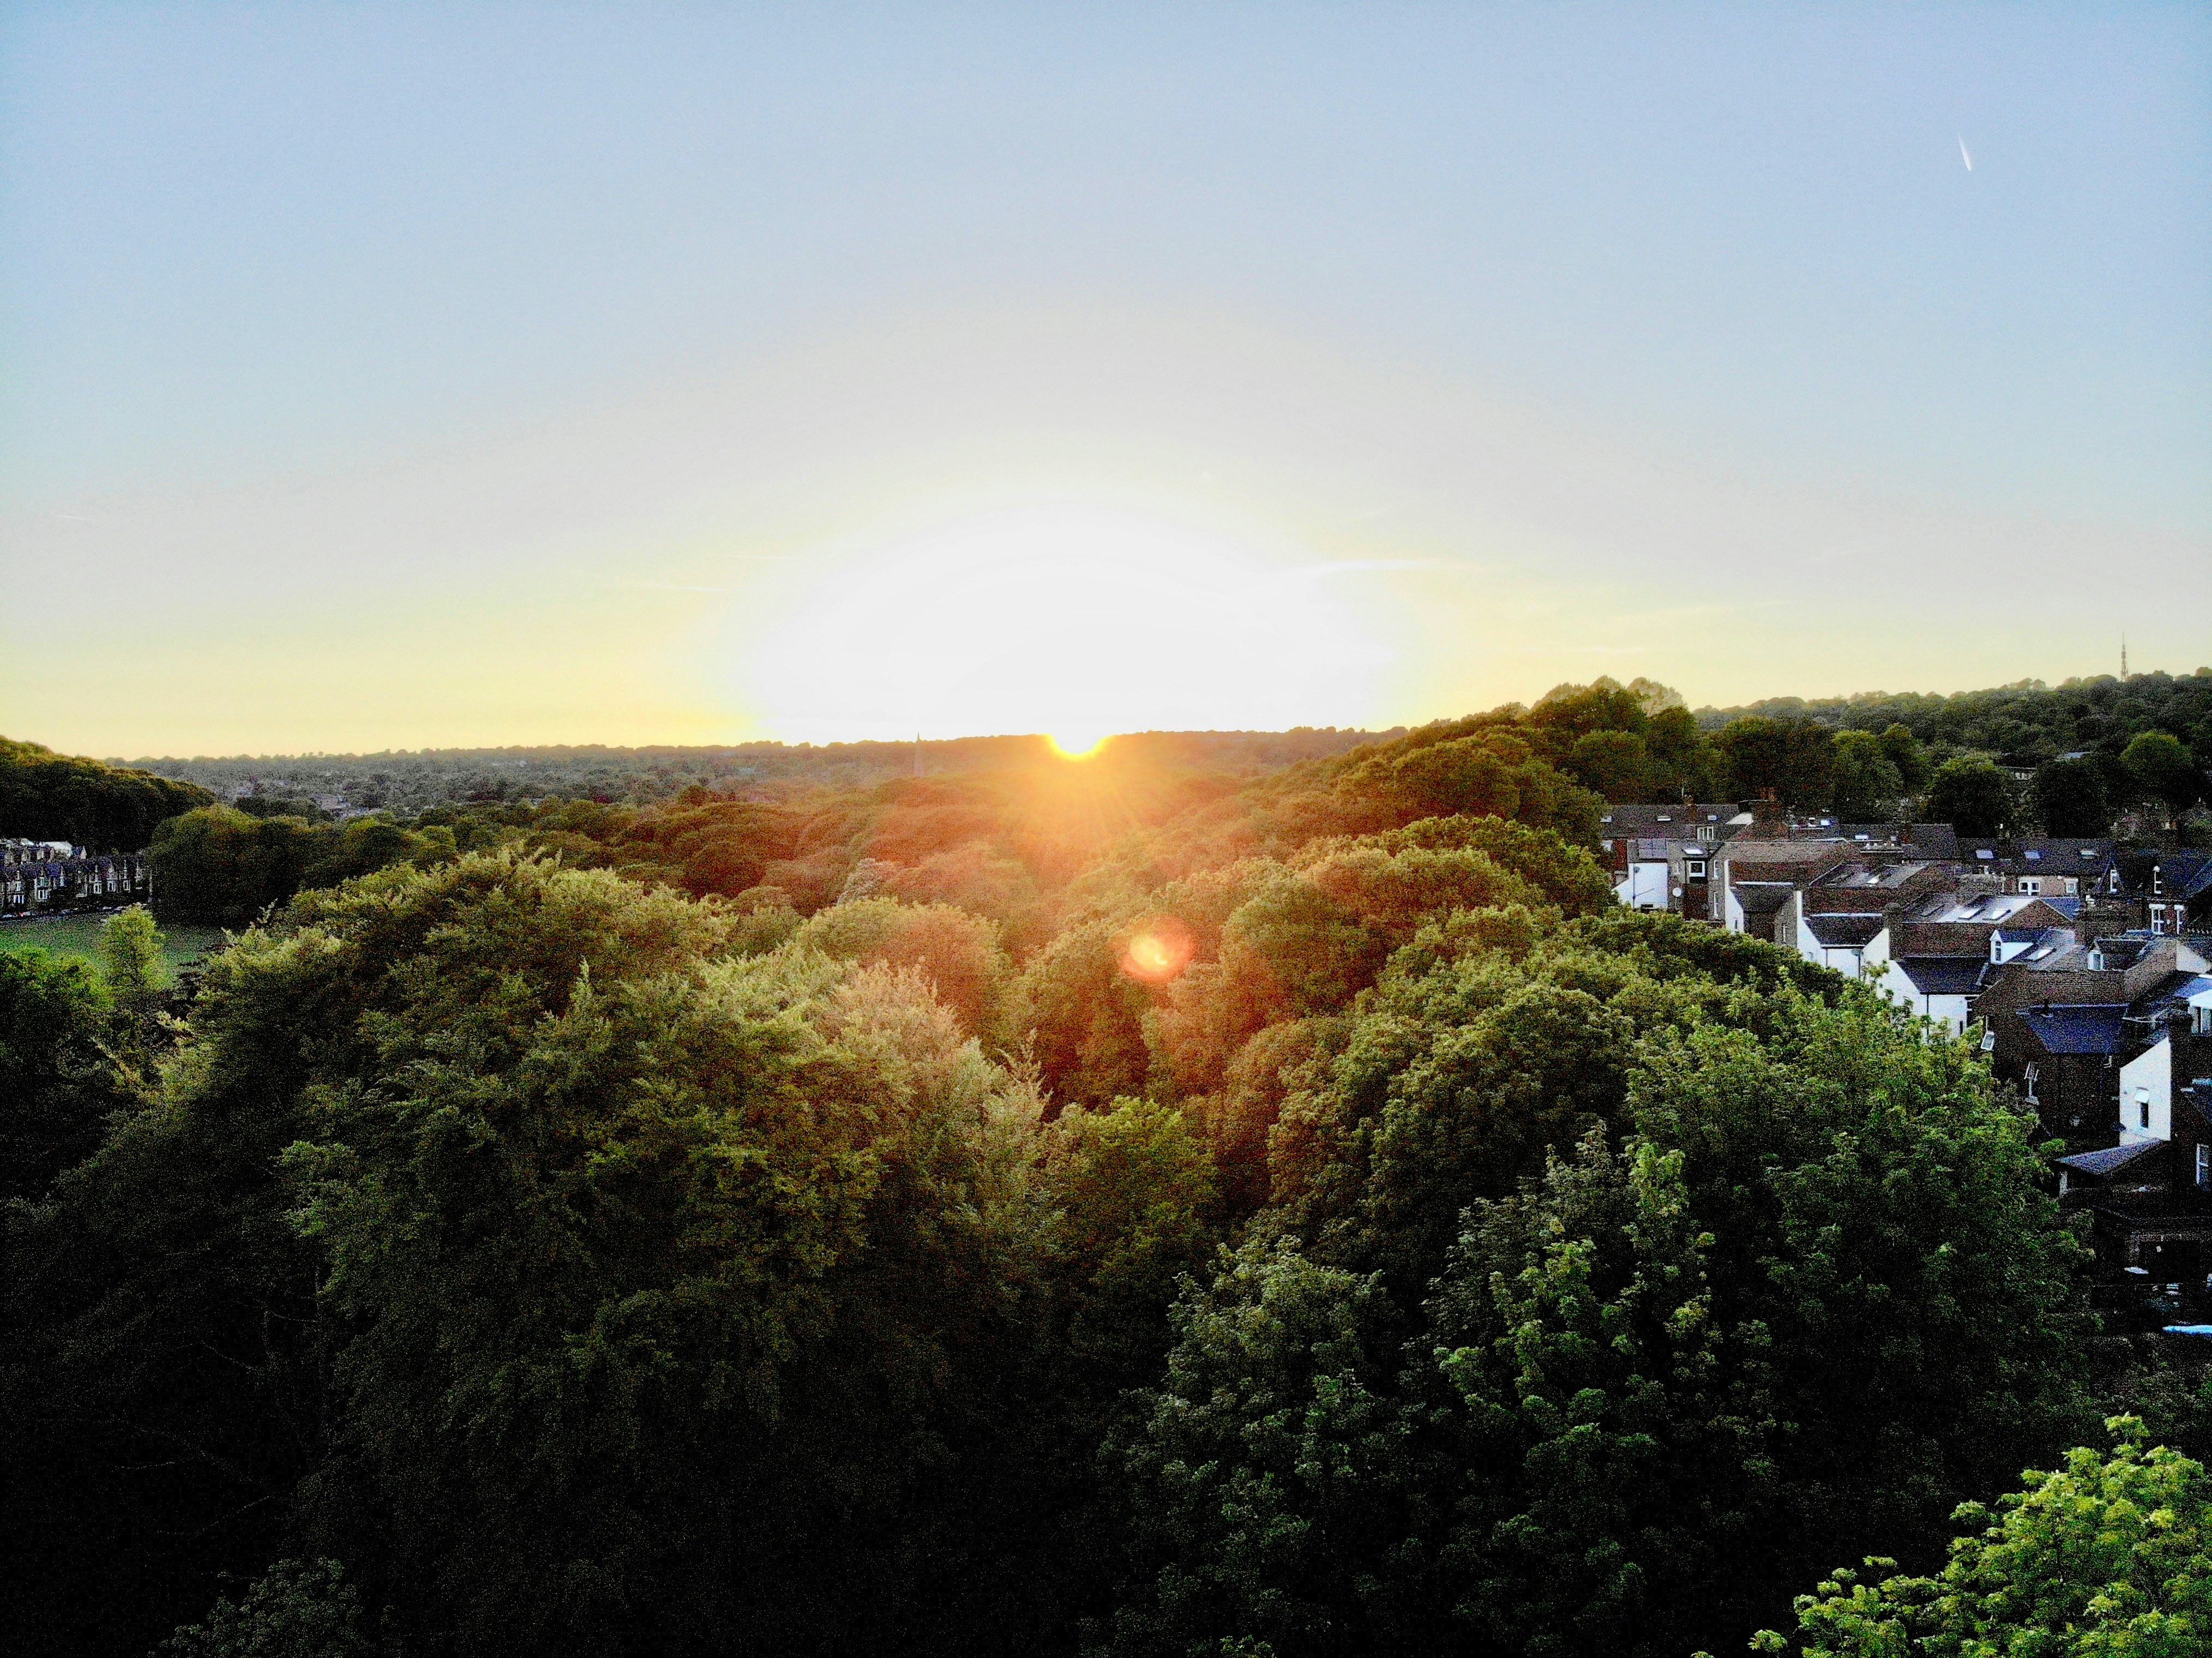 Sunset over Endcliffe Park. Help me continue to share images on Unsplash - I need a new camera: www.buymeacoffee.com/benjaminelliott